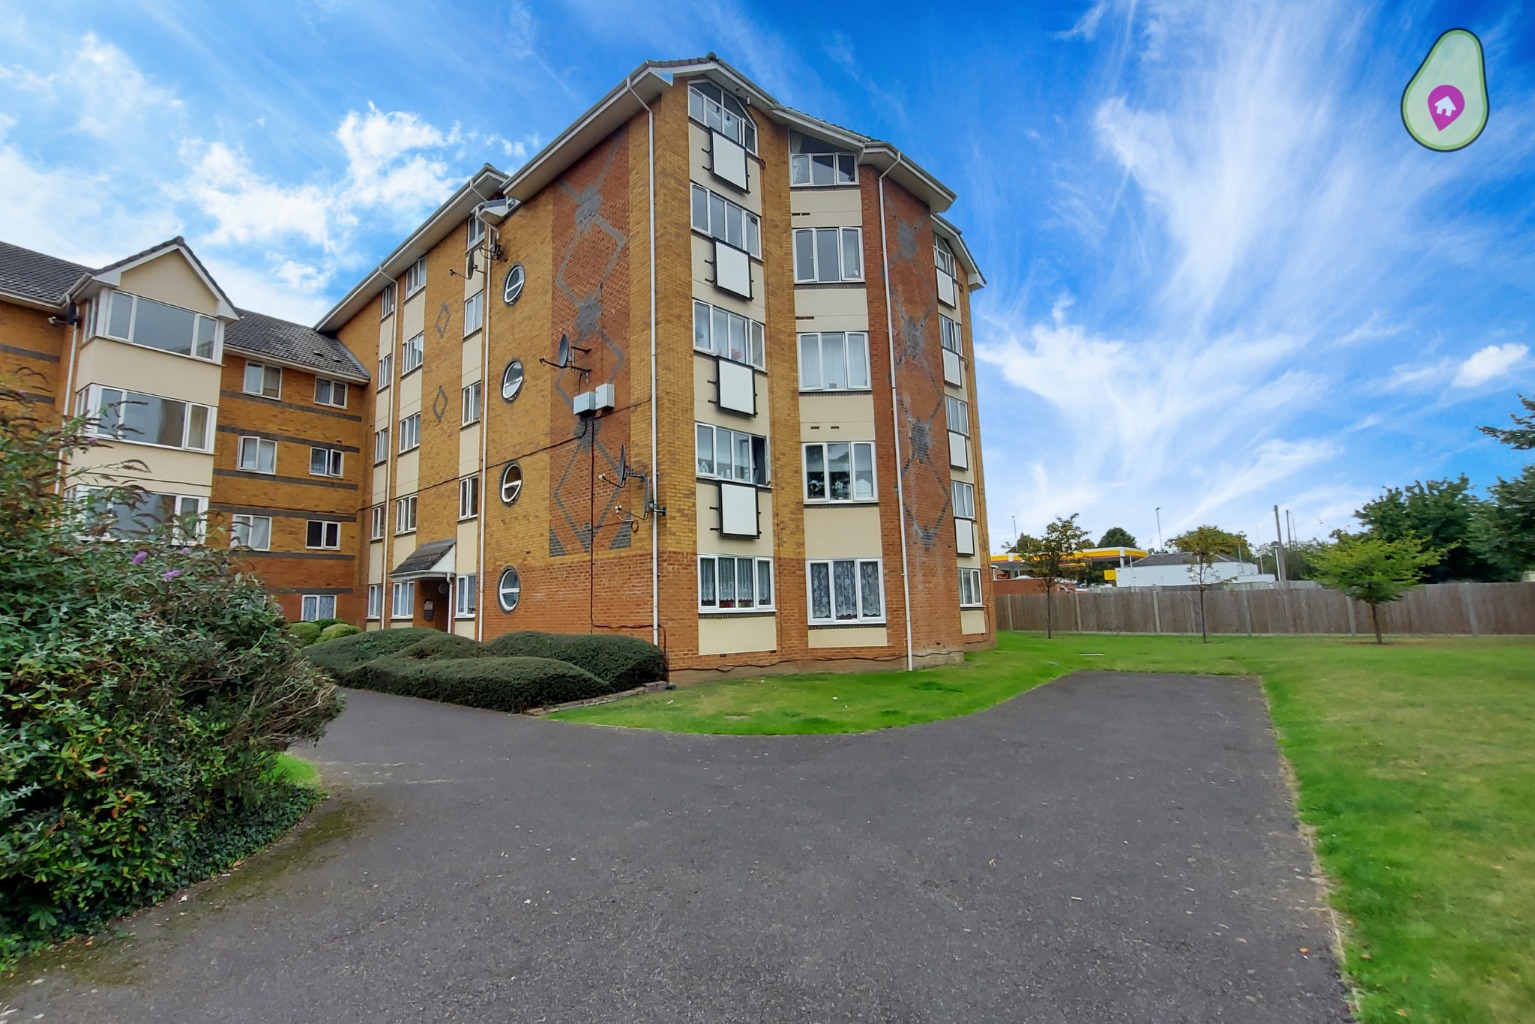 2 bed flat for sale  - Property Image 1